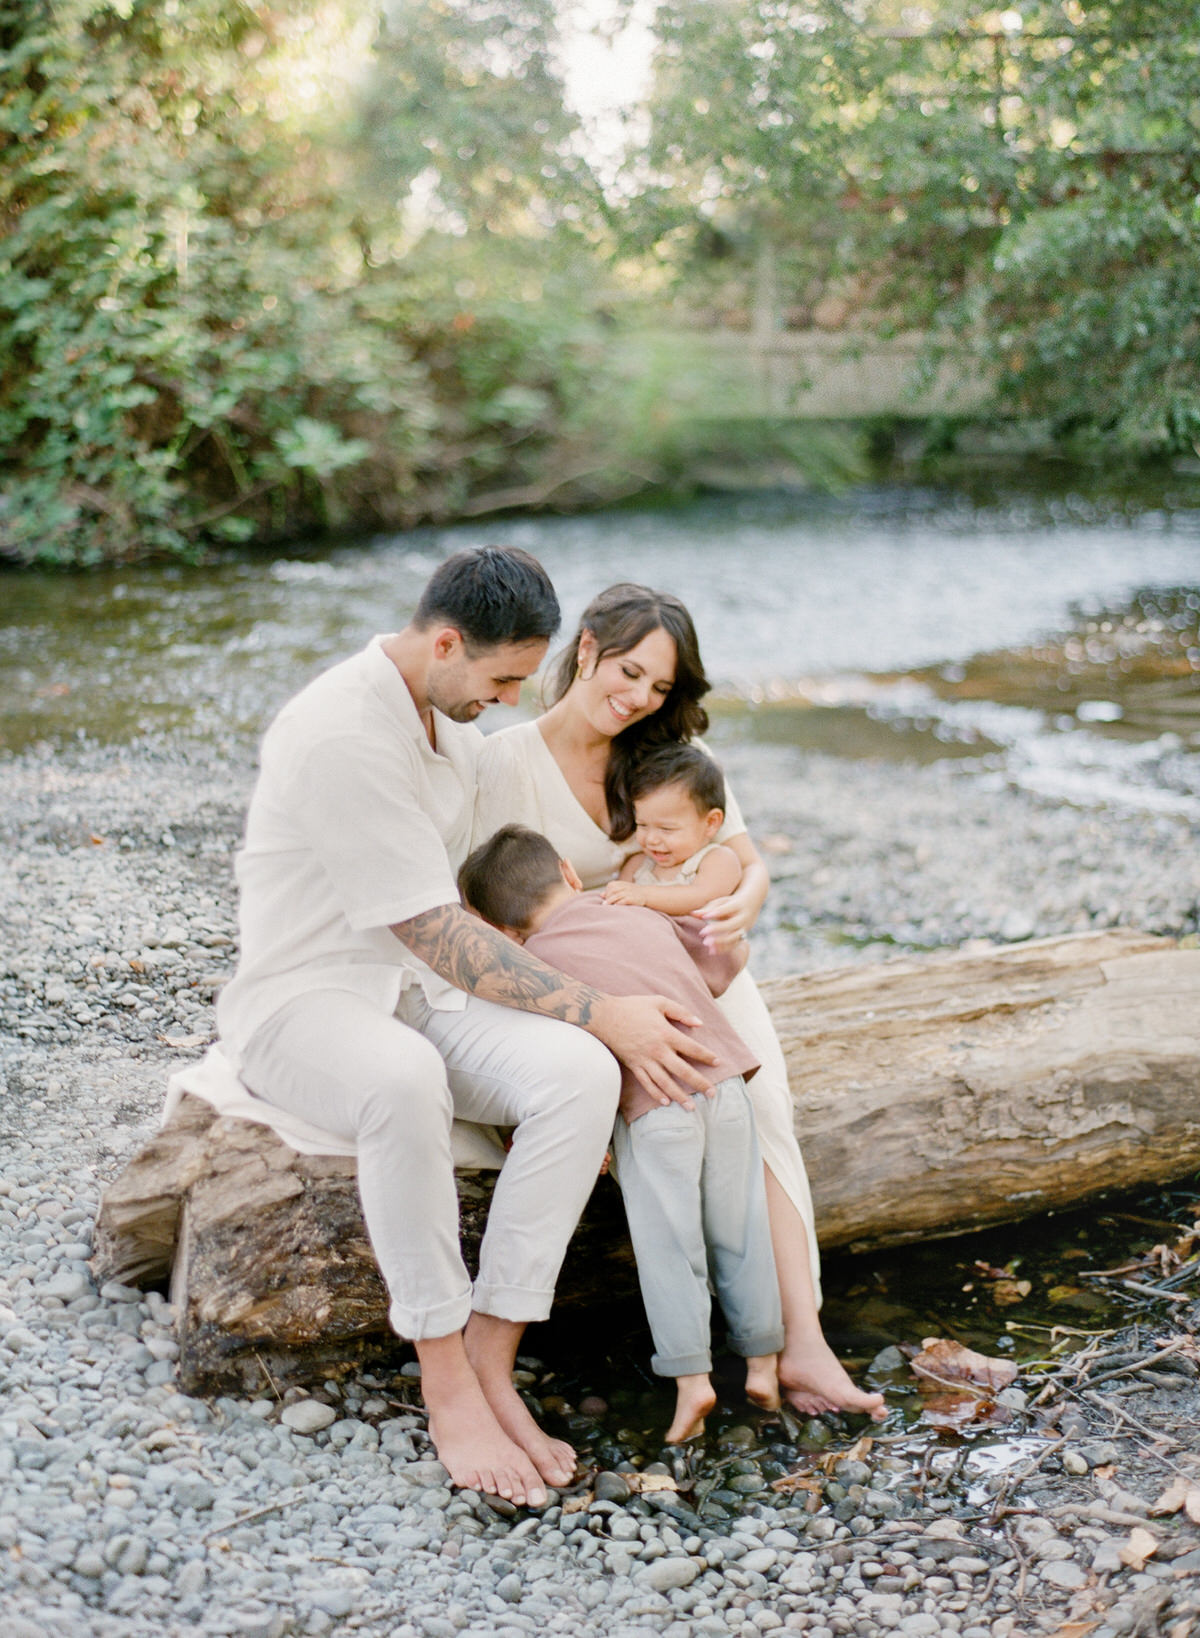 A Sunny Creekside California Family Session, Light and airy family photography - Charlotte Family Photography on Film - Charlotte Family Photography - Charlotte Family Photographer - Luxury Family Photography - Family Pictures on Film - San Francisco Bay Area Family Session on Film - Kent Avenue Photography - www.kentavenuephotography.com